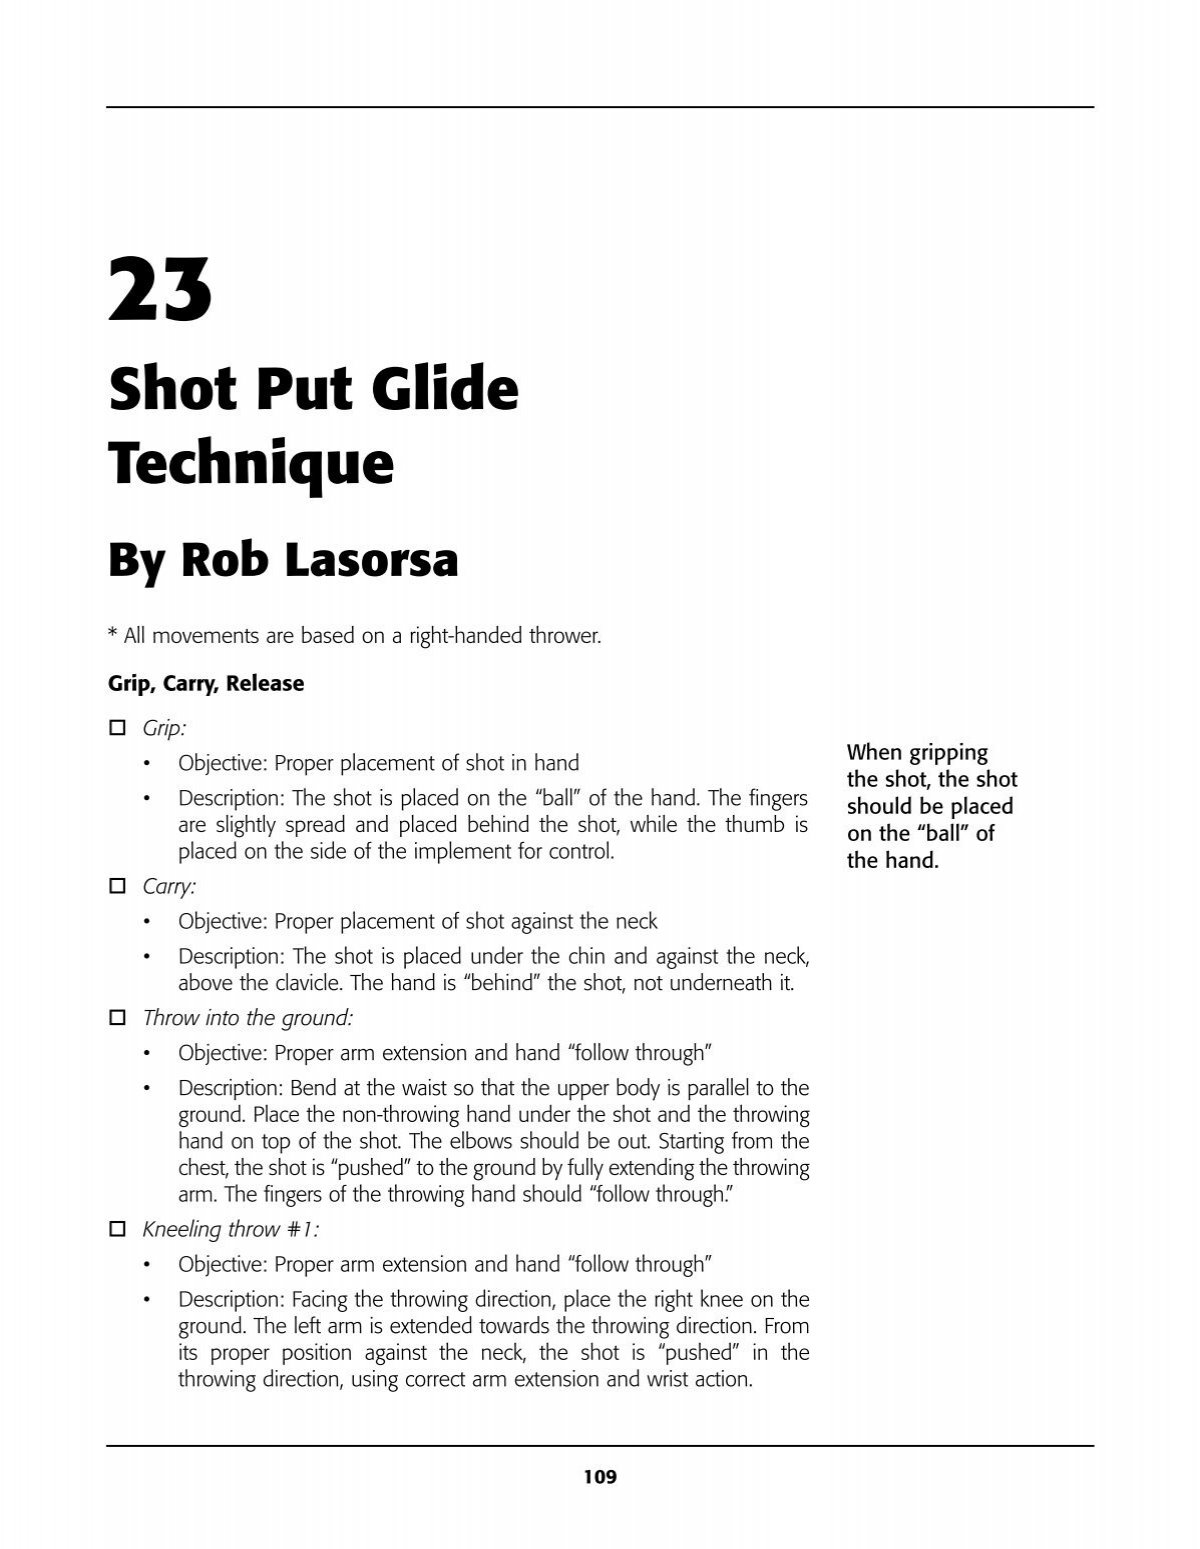 How To Hold Shot Put For The Glide Technique